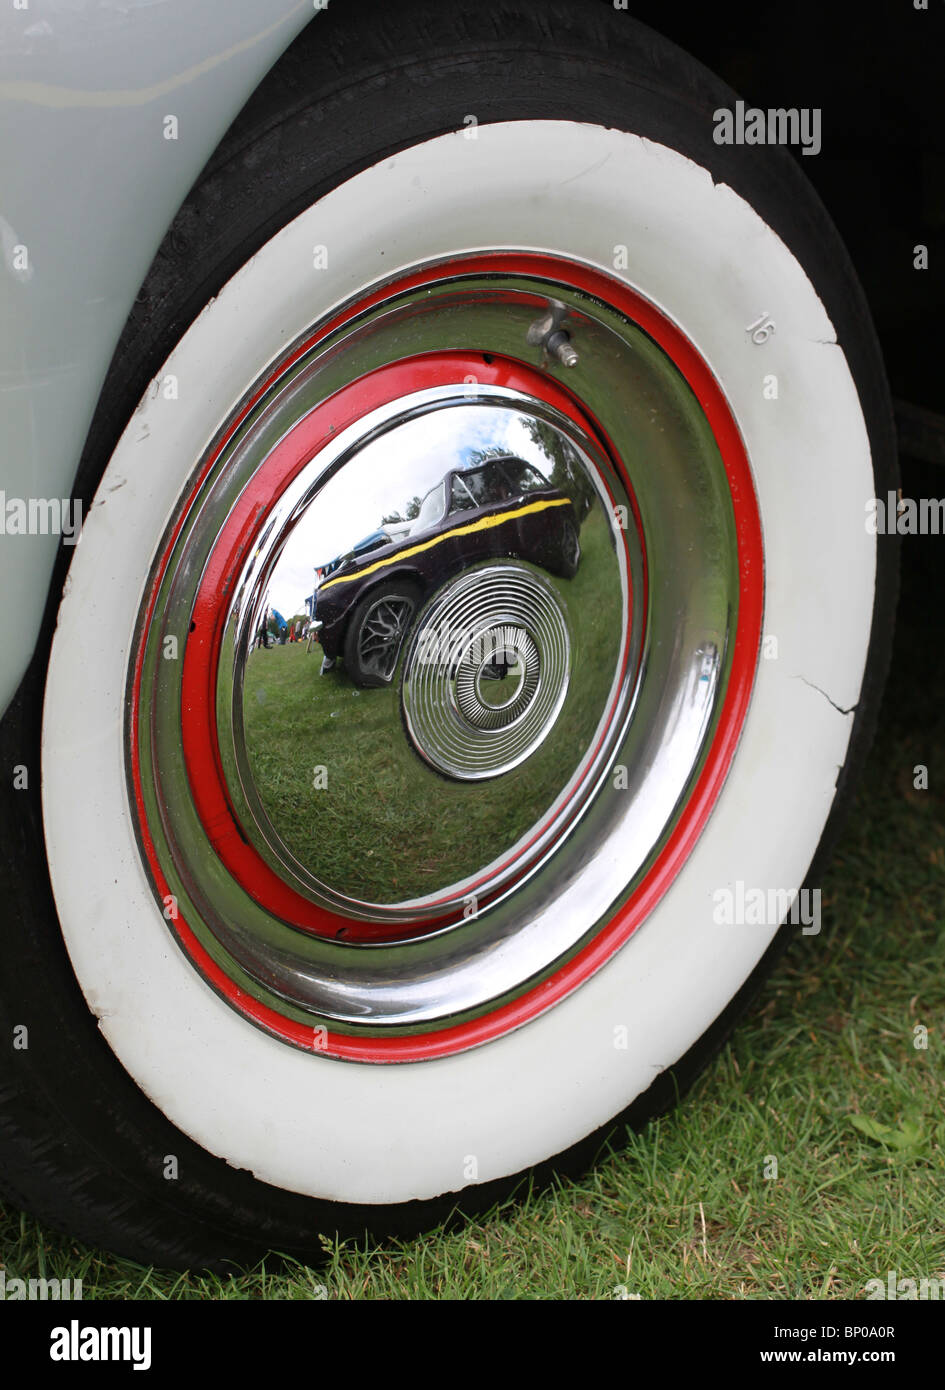 Hillman Imp reflected in wheel trim of 1951 Humber Super Snipe Mark 3 at a classic car show Stock Photo